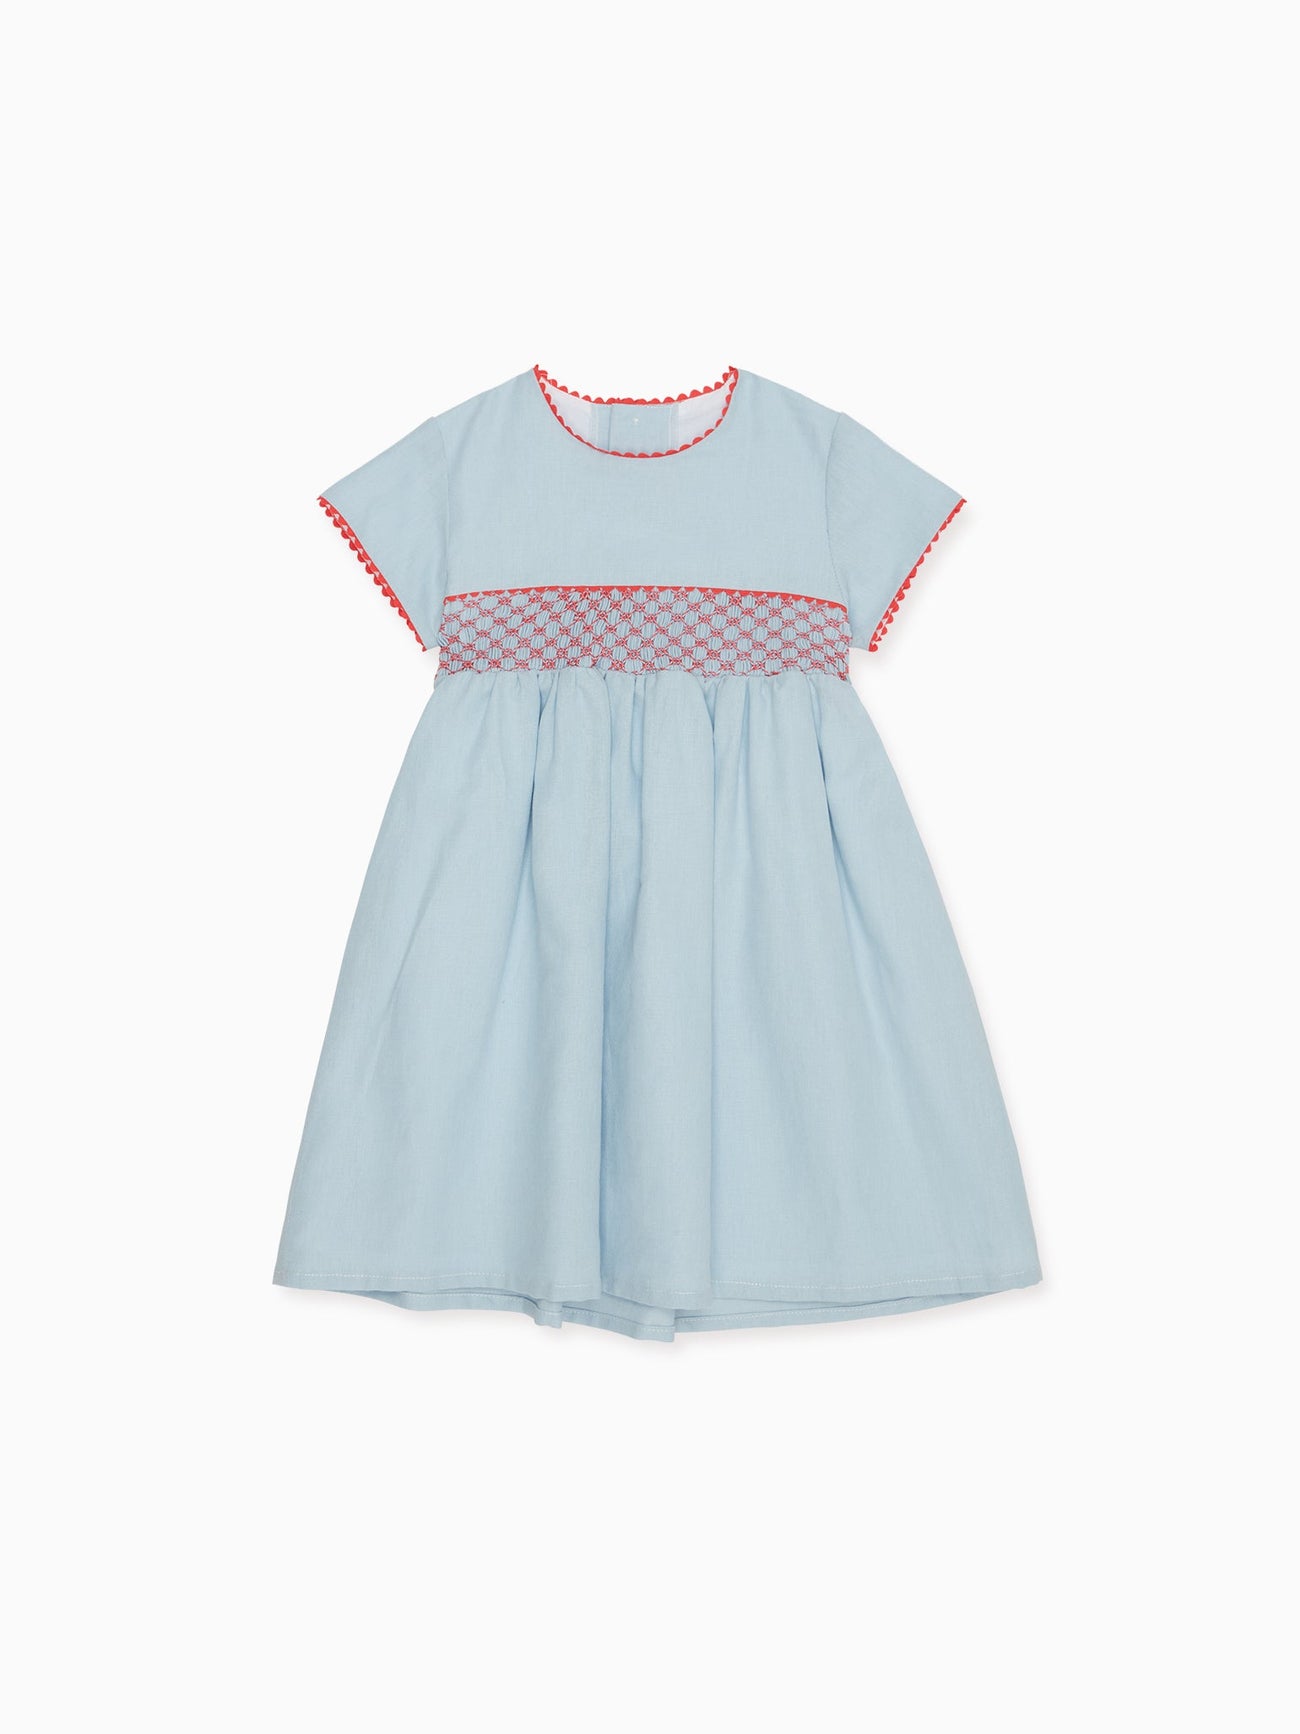 What Is a Smock Dress & How To Style It – La Coqueta Kids